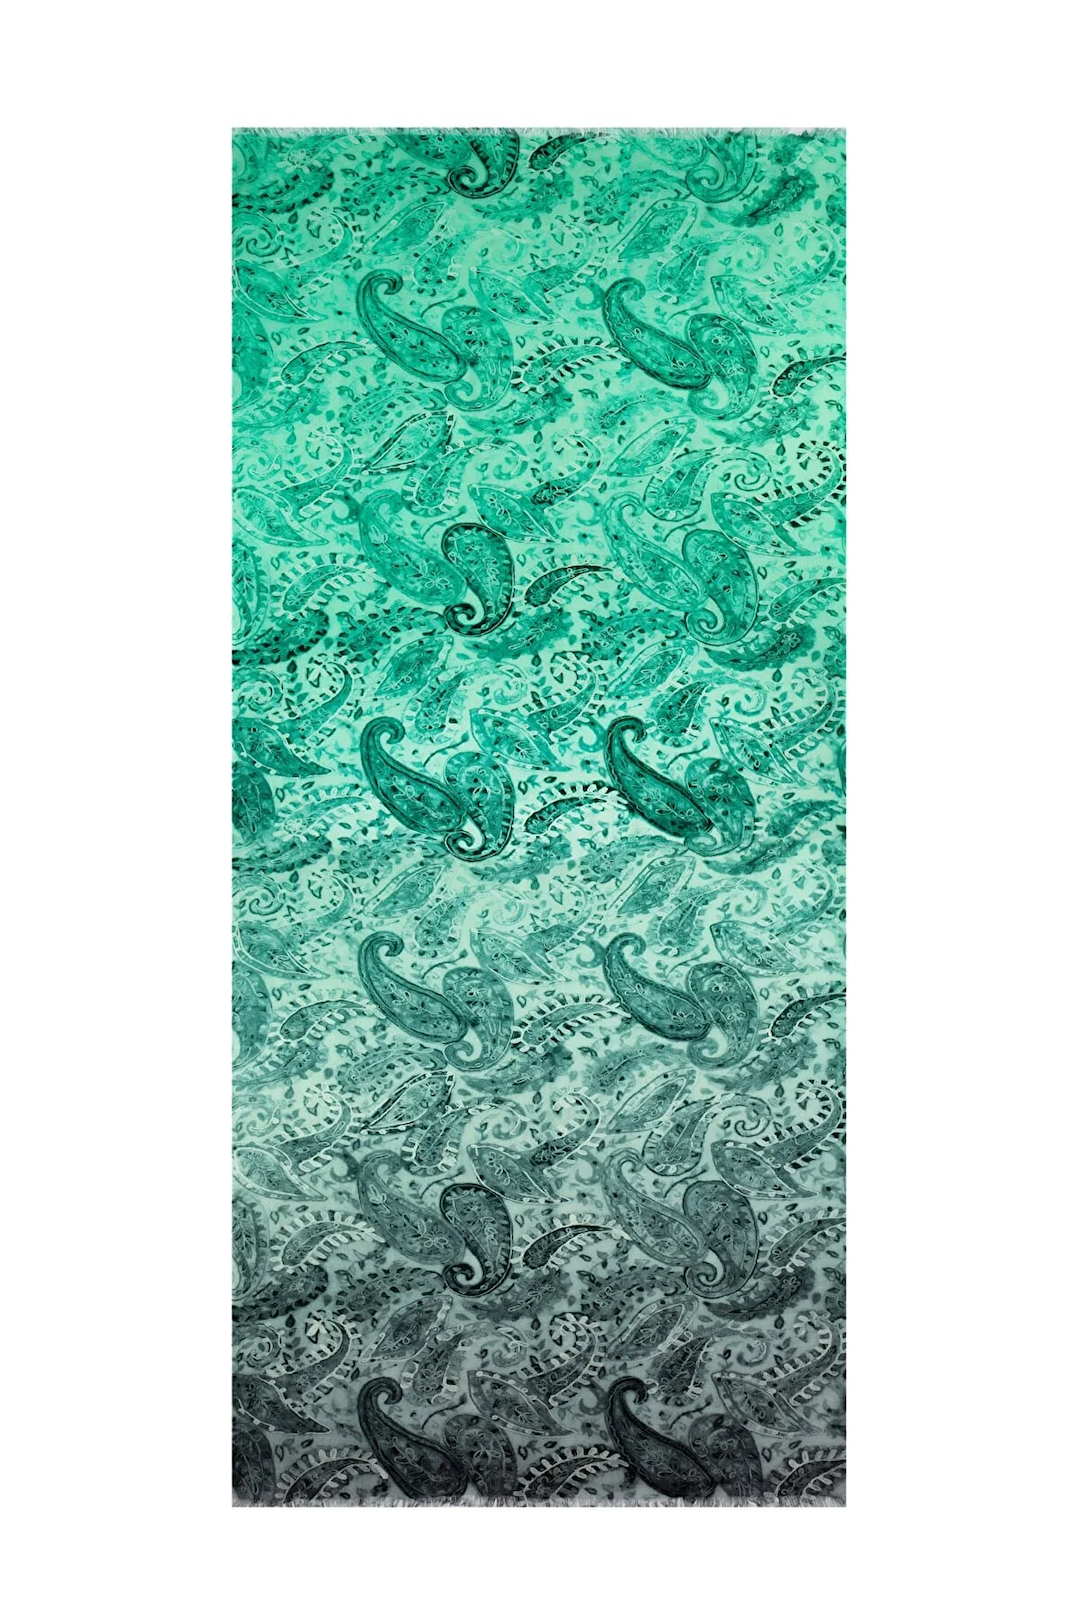 Micro Modal Cashmere Printed Embroidery Shawl - Teal Paisley